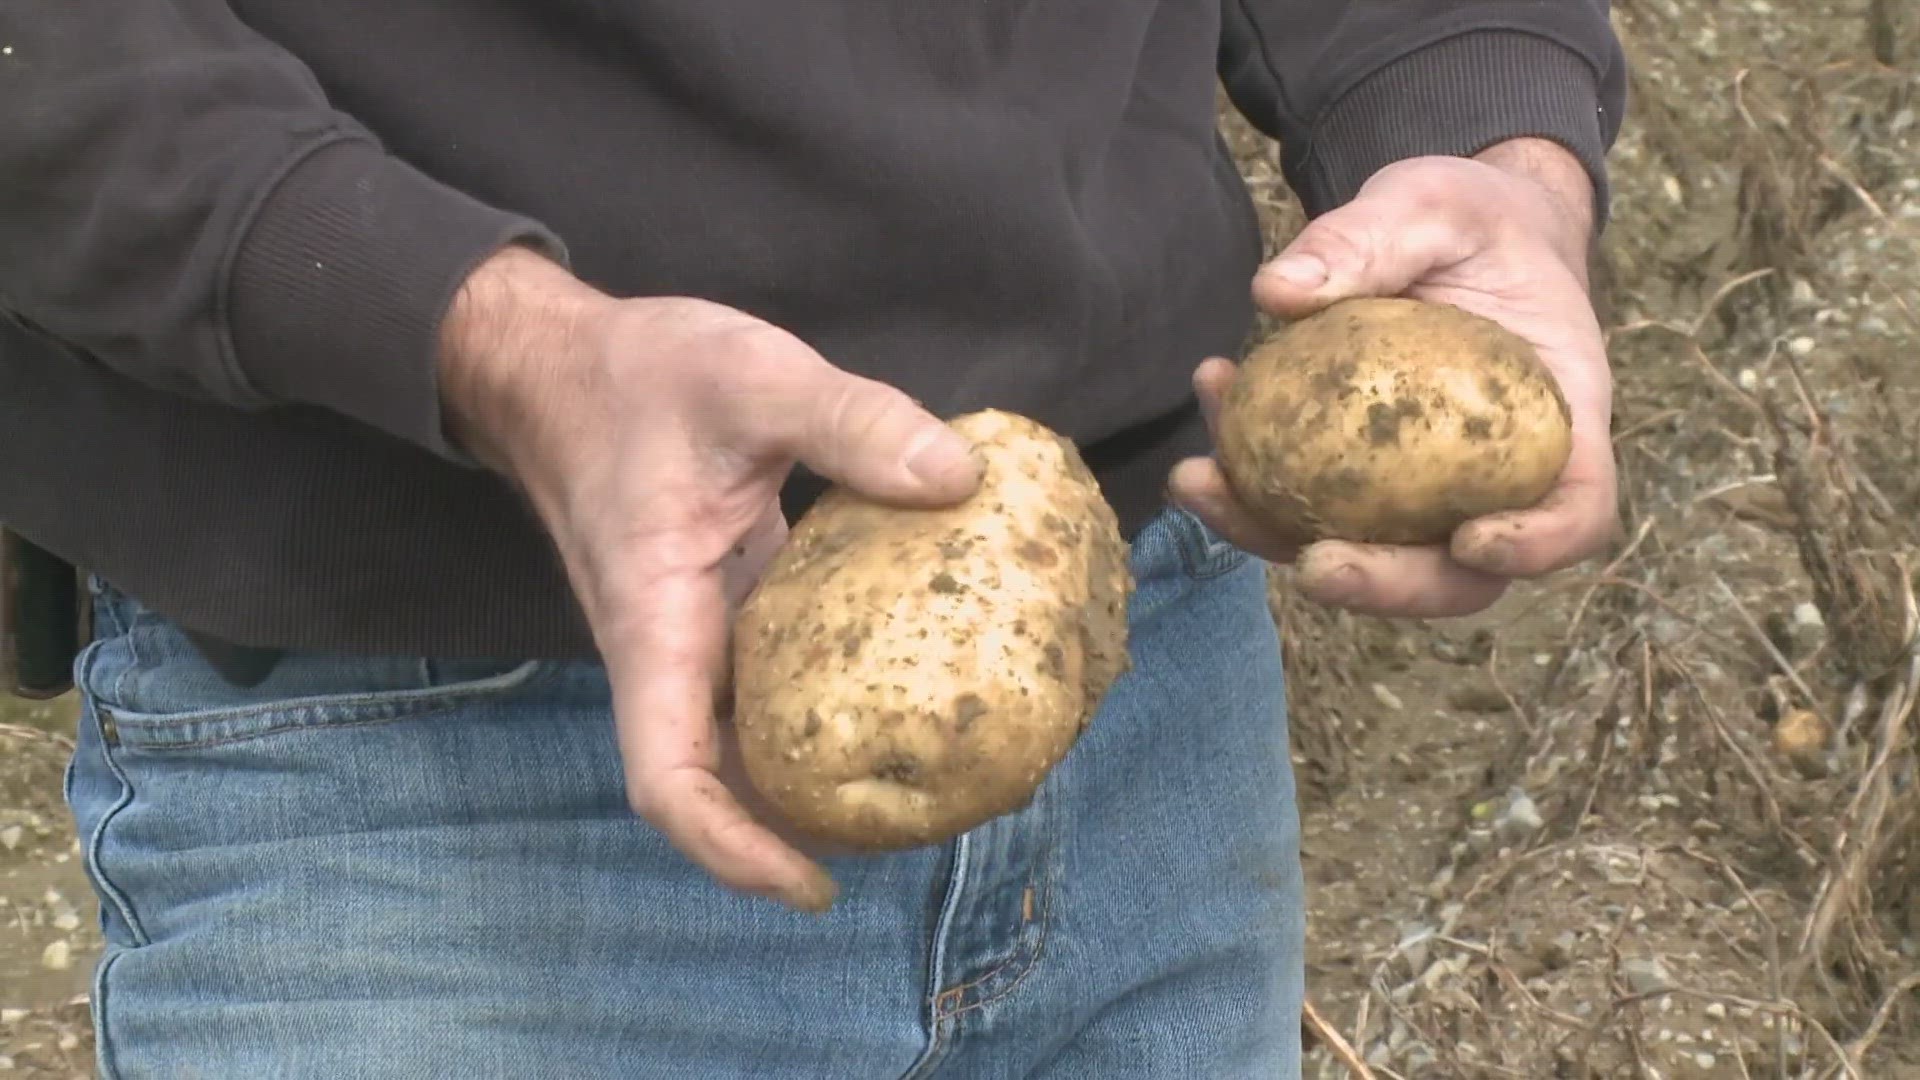 After a fire destroyed its Belfast plant, the company decided to focus efforts at its Washburn facility. Here's a closer look at Maine's No. 1 potato grower.